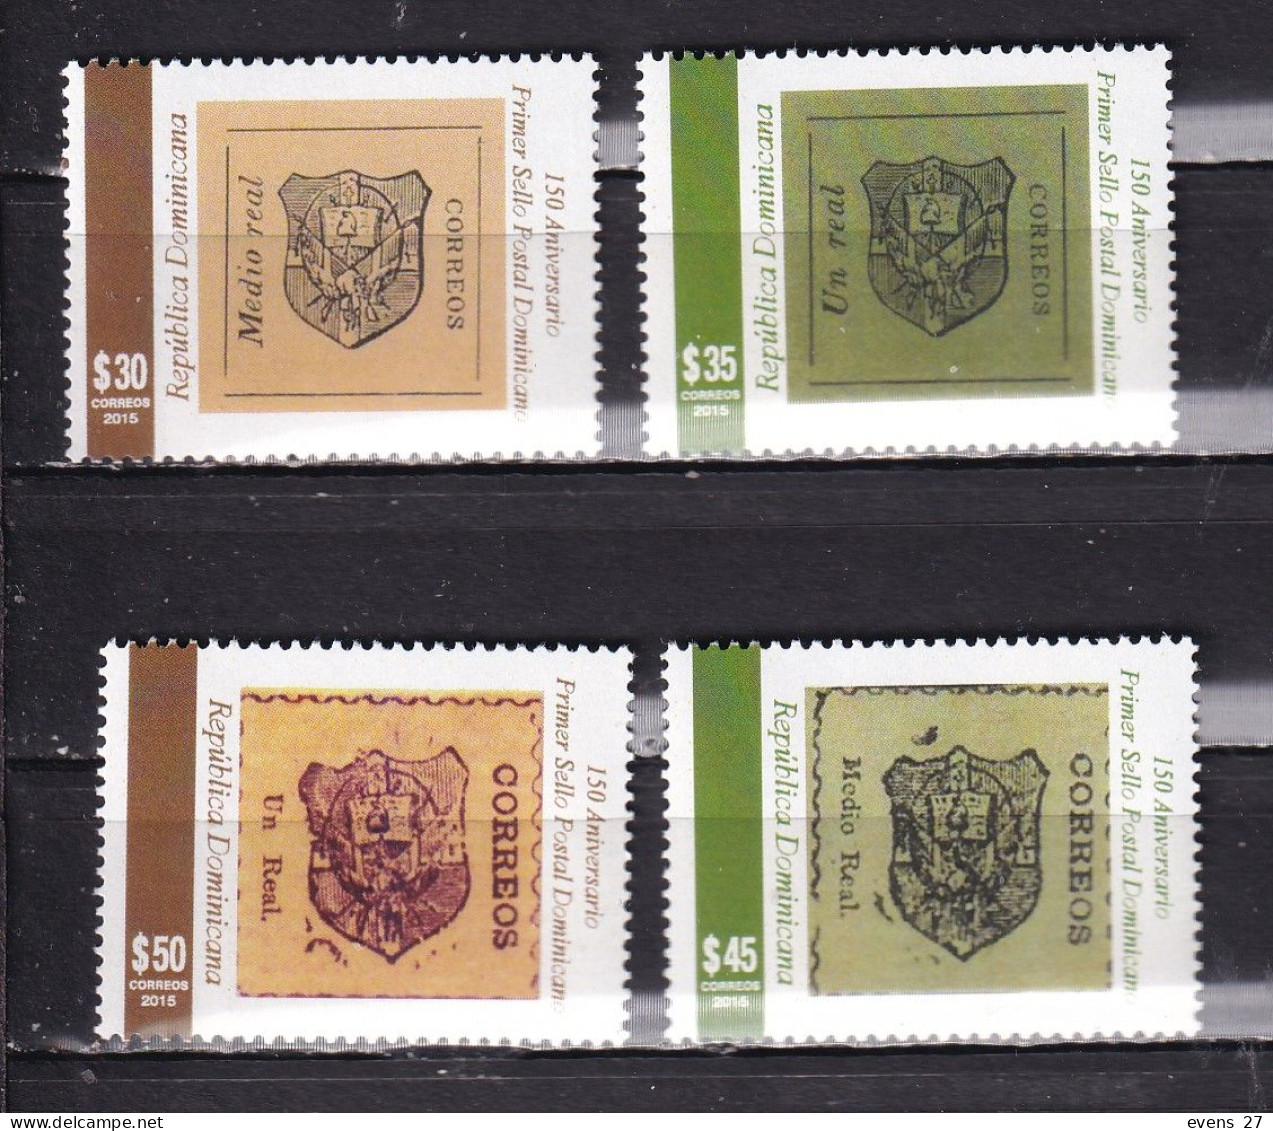 DOMINICAN REPUBLIC 2015-STAMPS ON STAMPS-MNH, - República Dominicana